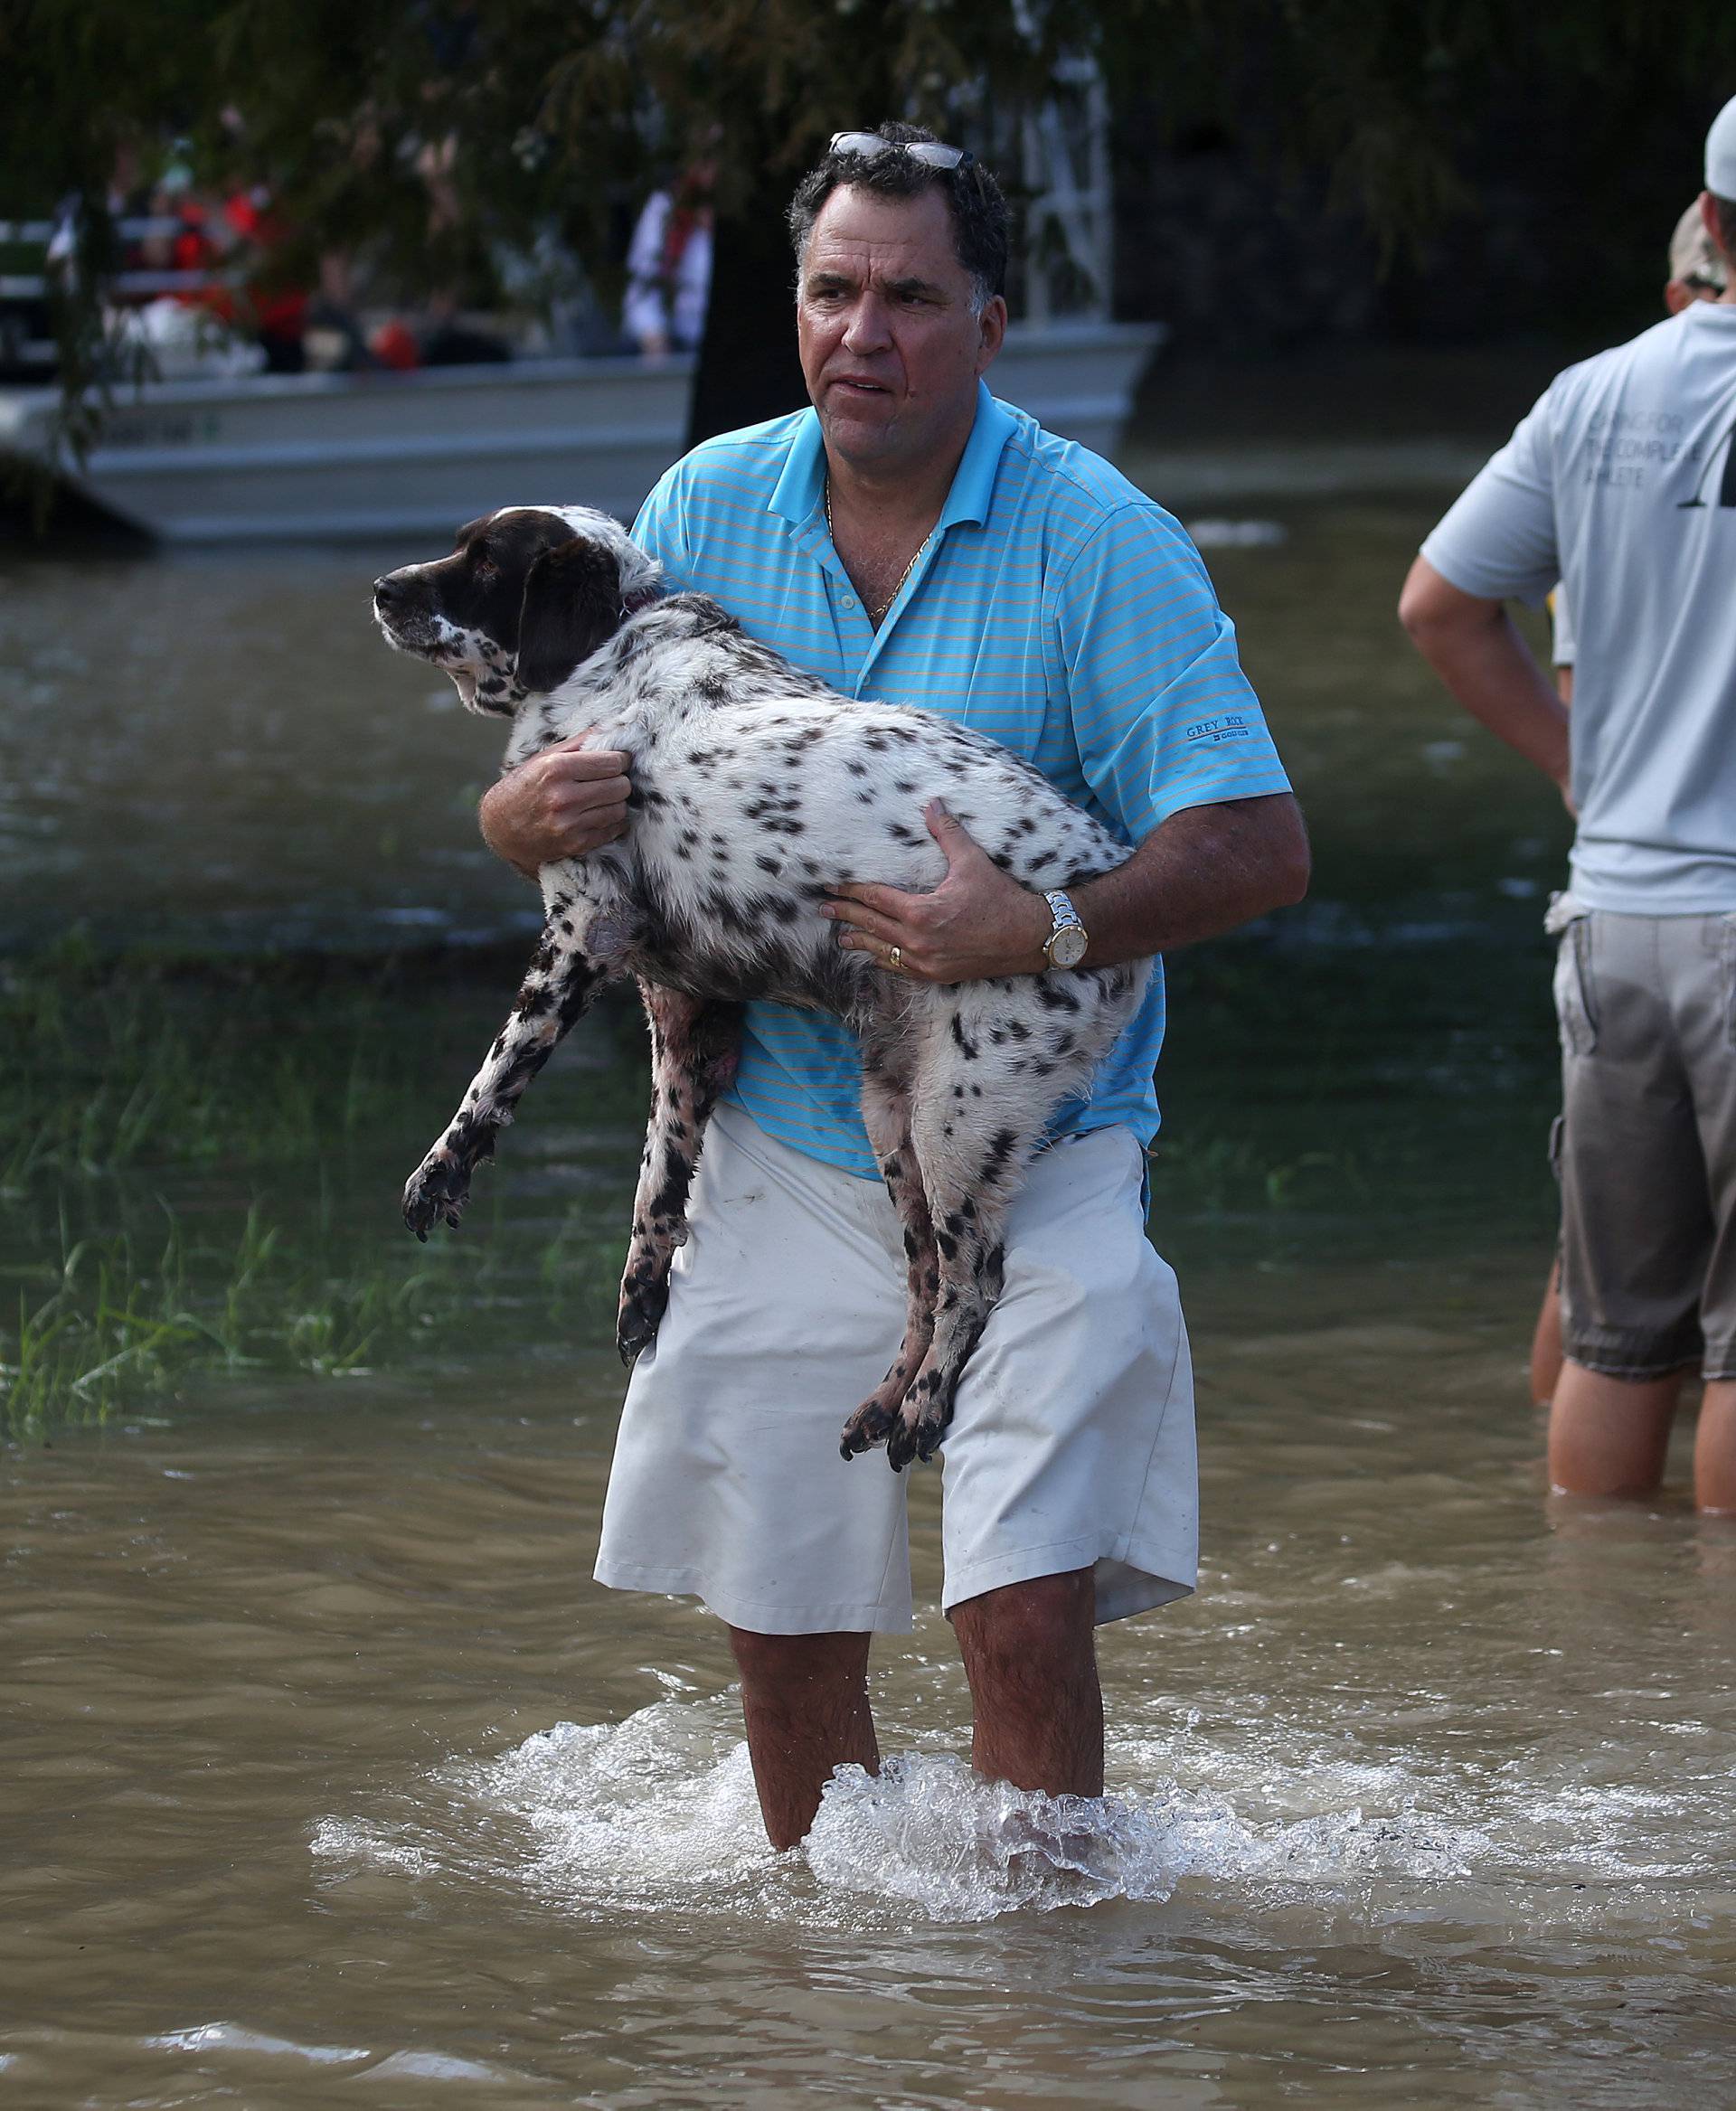 A man carries his dog through flood water after being evacuated from the rising water following Hurricane Harvey in a neighborhood west of Houston, Texas